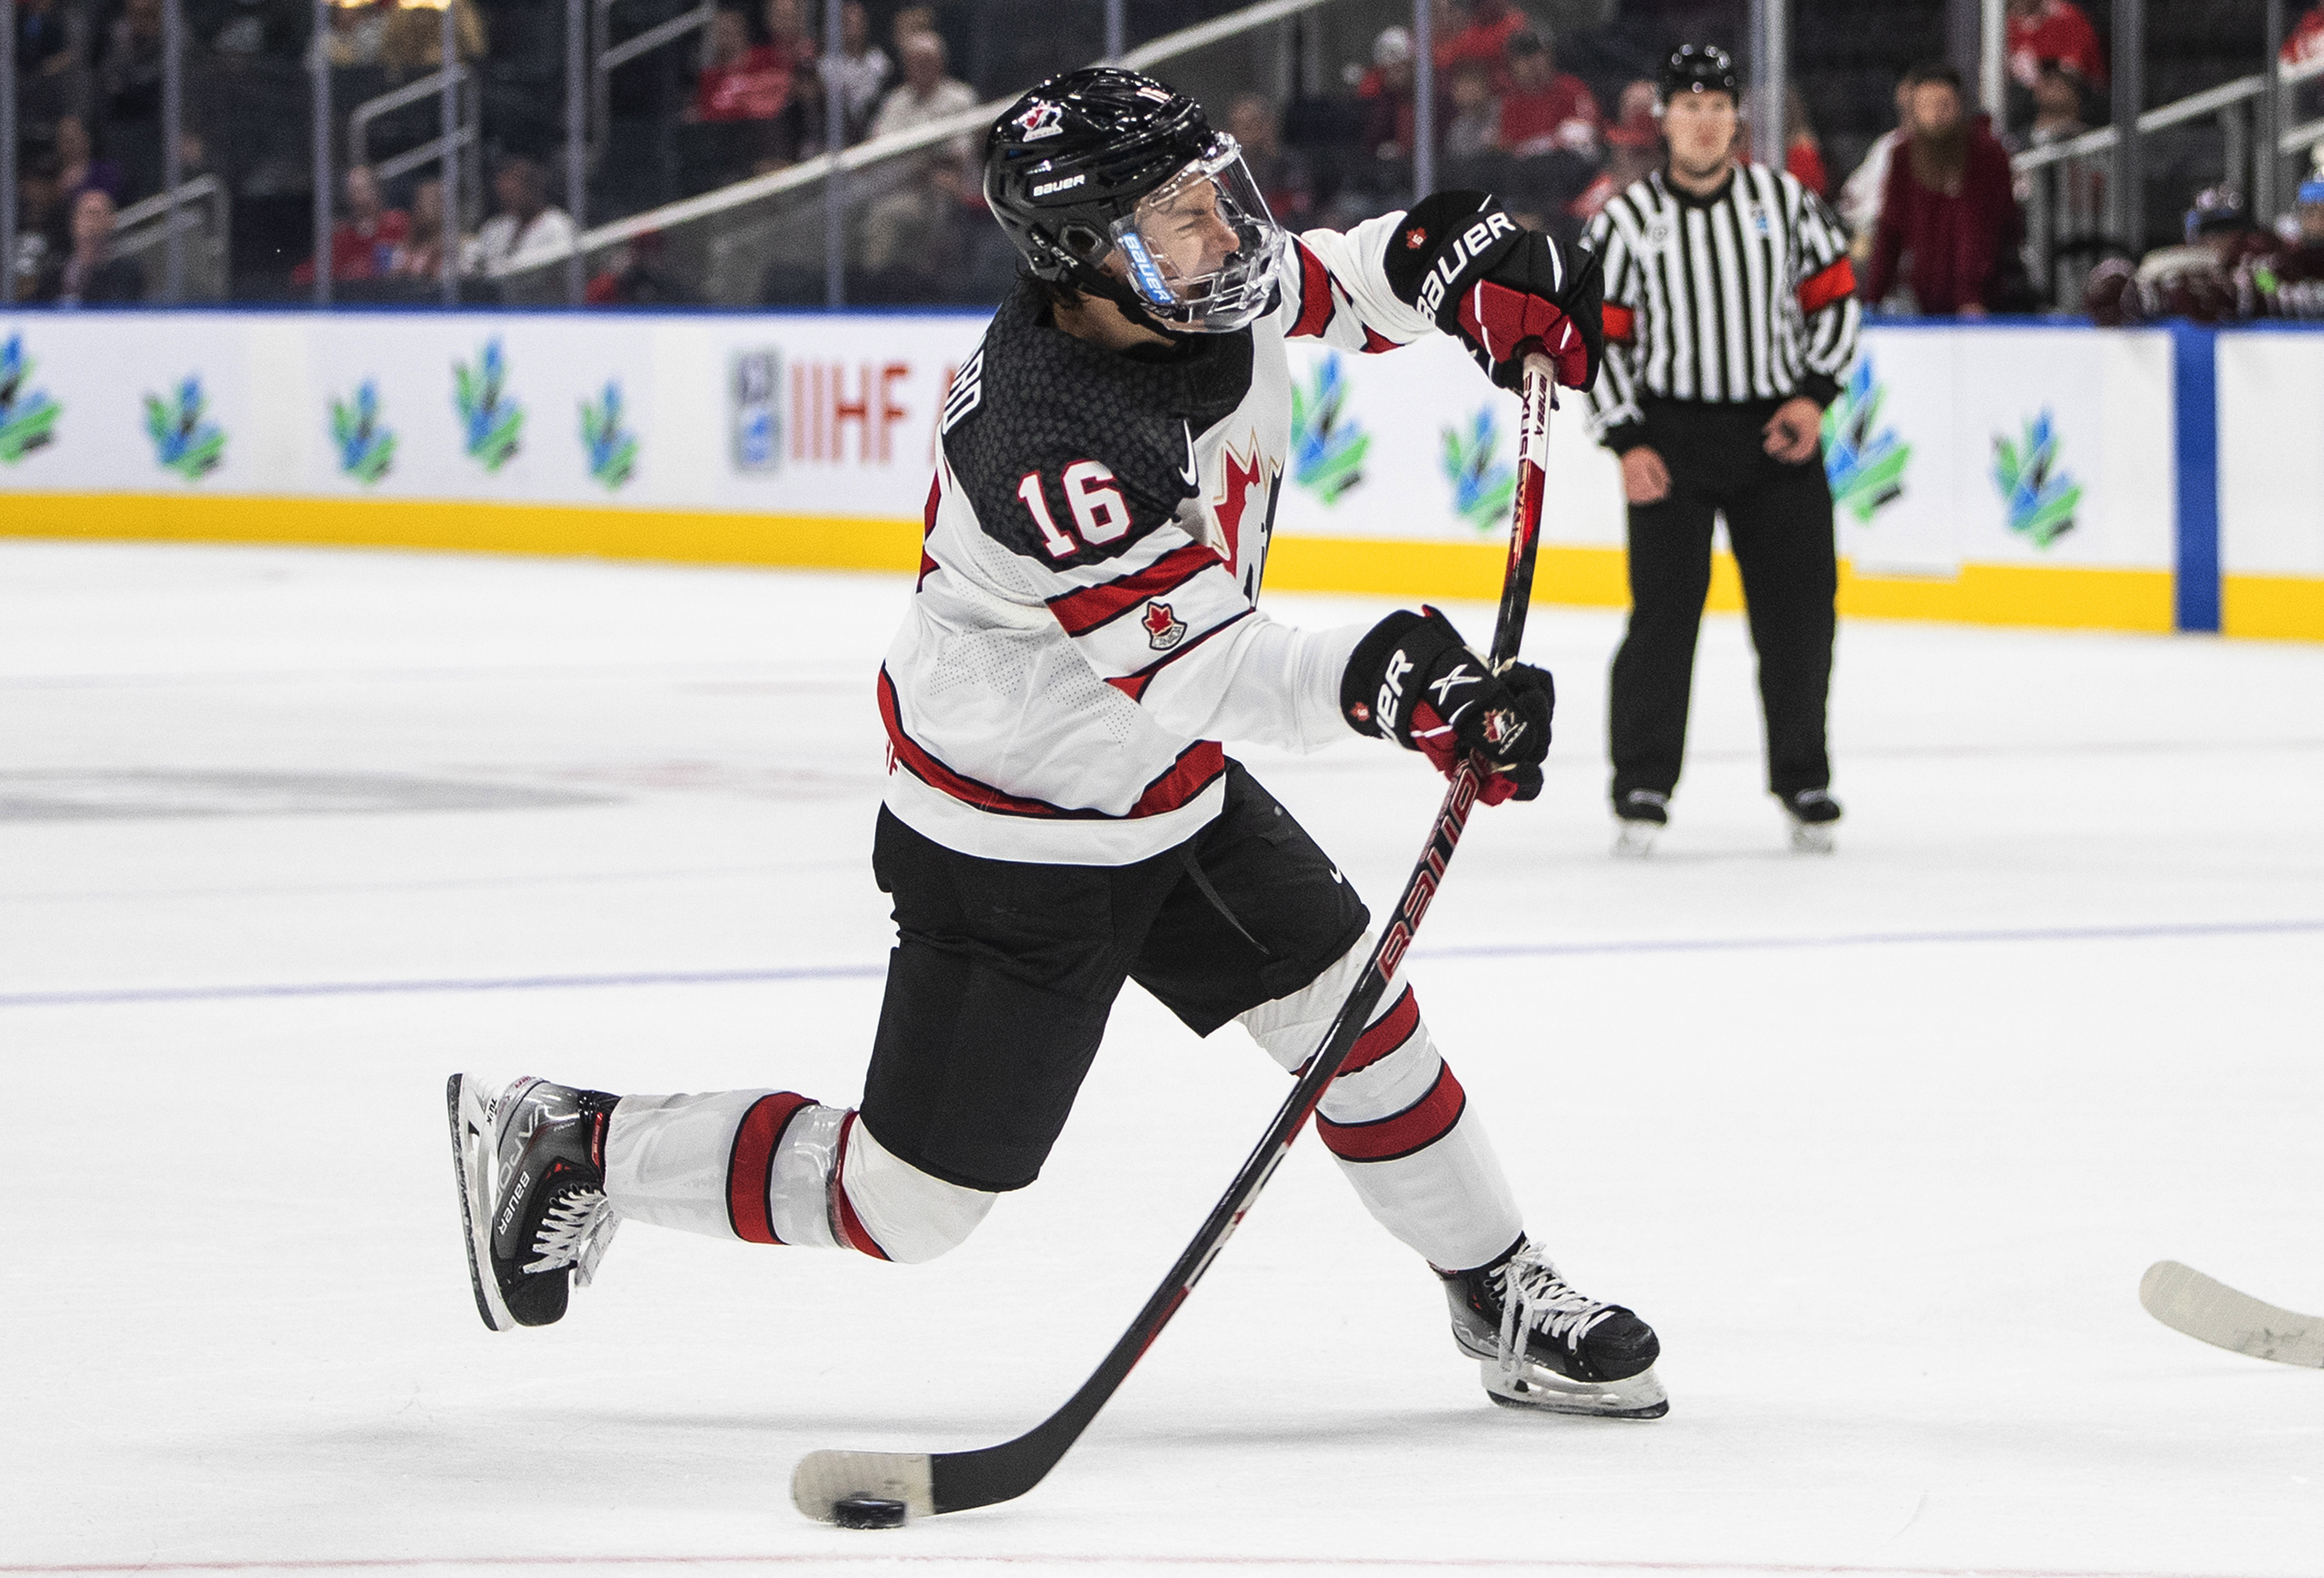 Top Prospects Take an Unconventional Path to the World Juniors